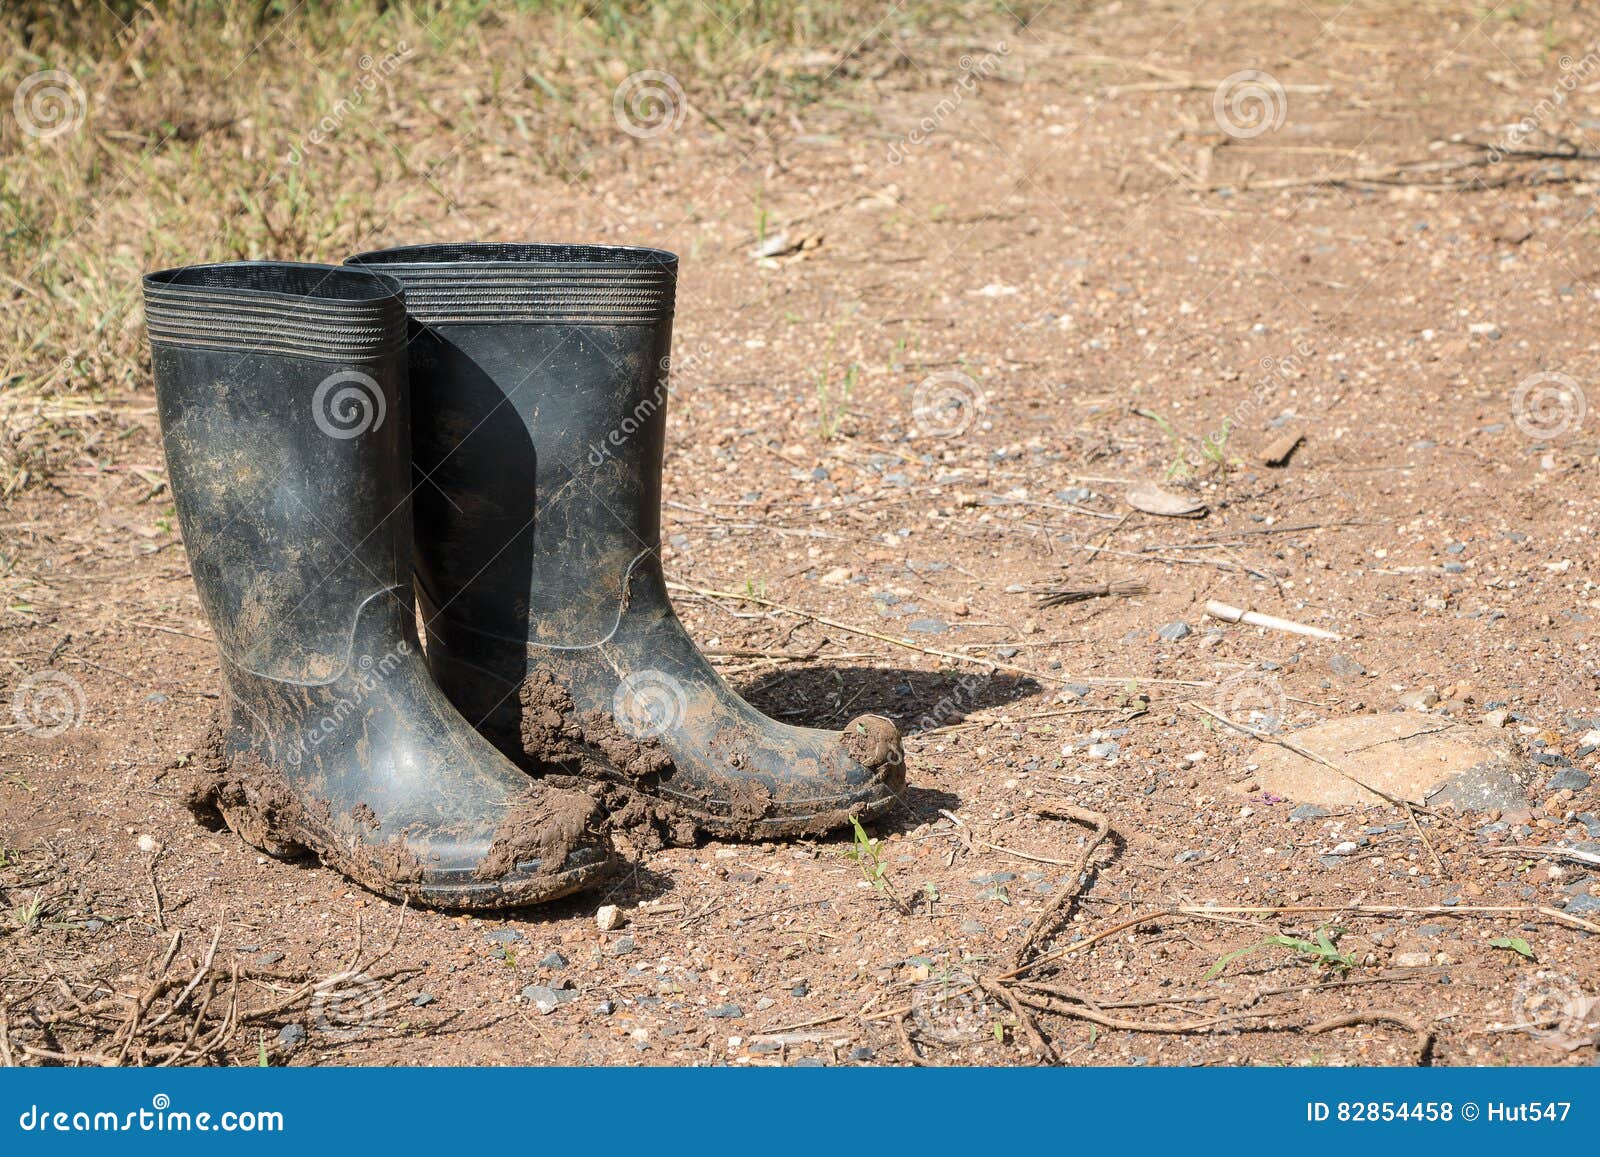 Dirty rubber boots stock photo. Image of plastic, grimy - 82854458